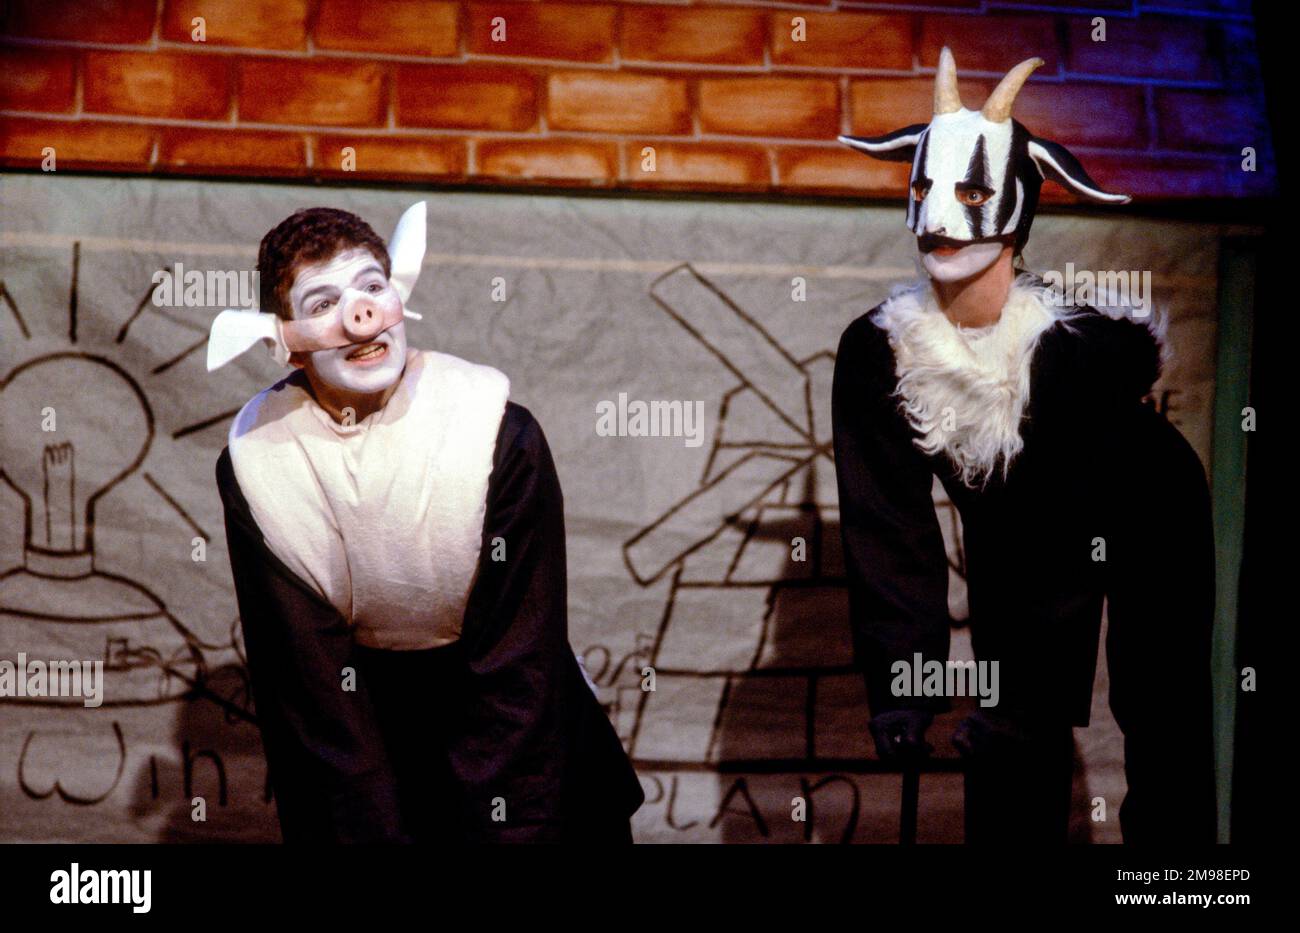 left: Snowball (Greg Hicks) in ANIMAL FARM by George Orwell at the Cottesloe Theatre, National Theatre (NT), London SE1  25/04/1984  adapted & directed by Peter Hall  design: Jennifer Carey  lighting: John Bury  movement: Stuart Hopps Stock Photo